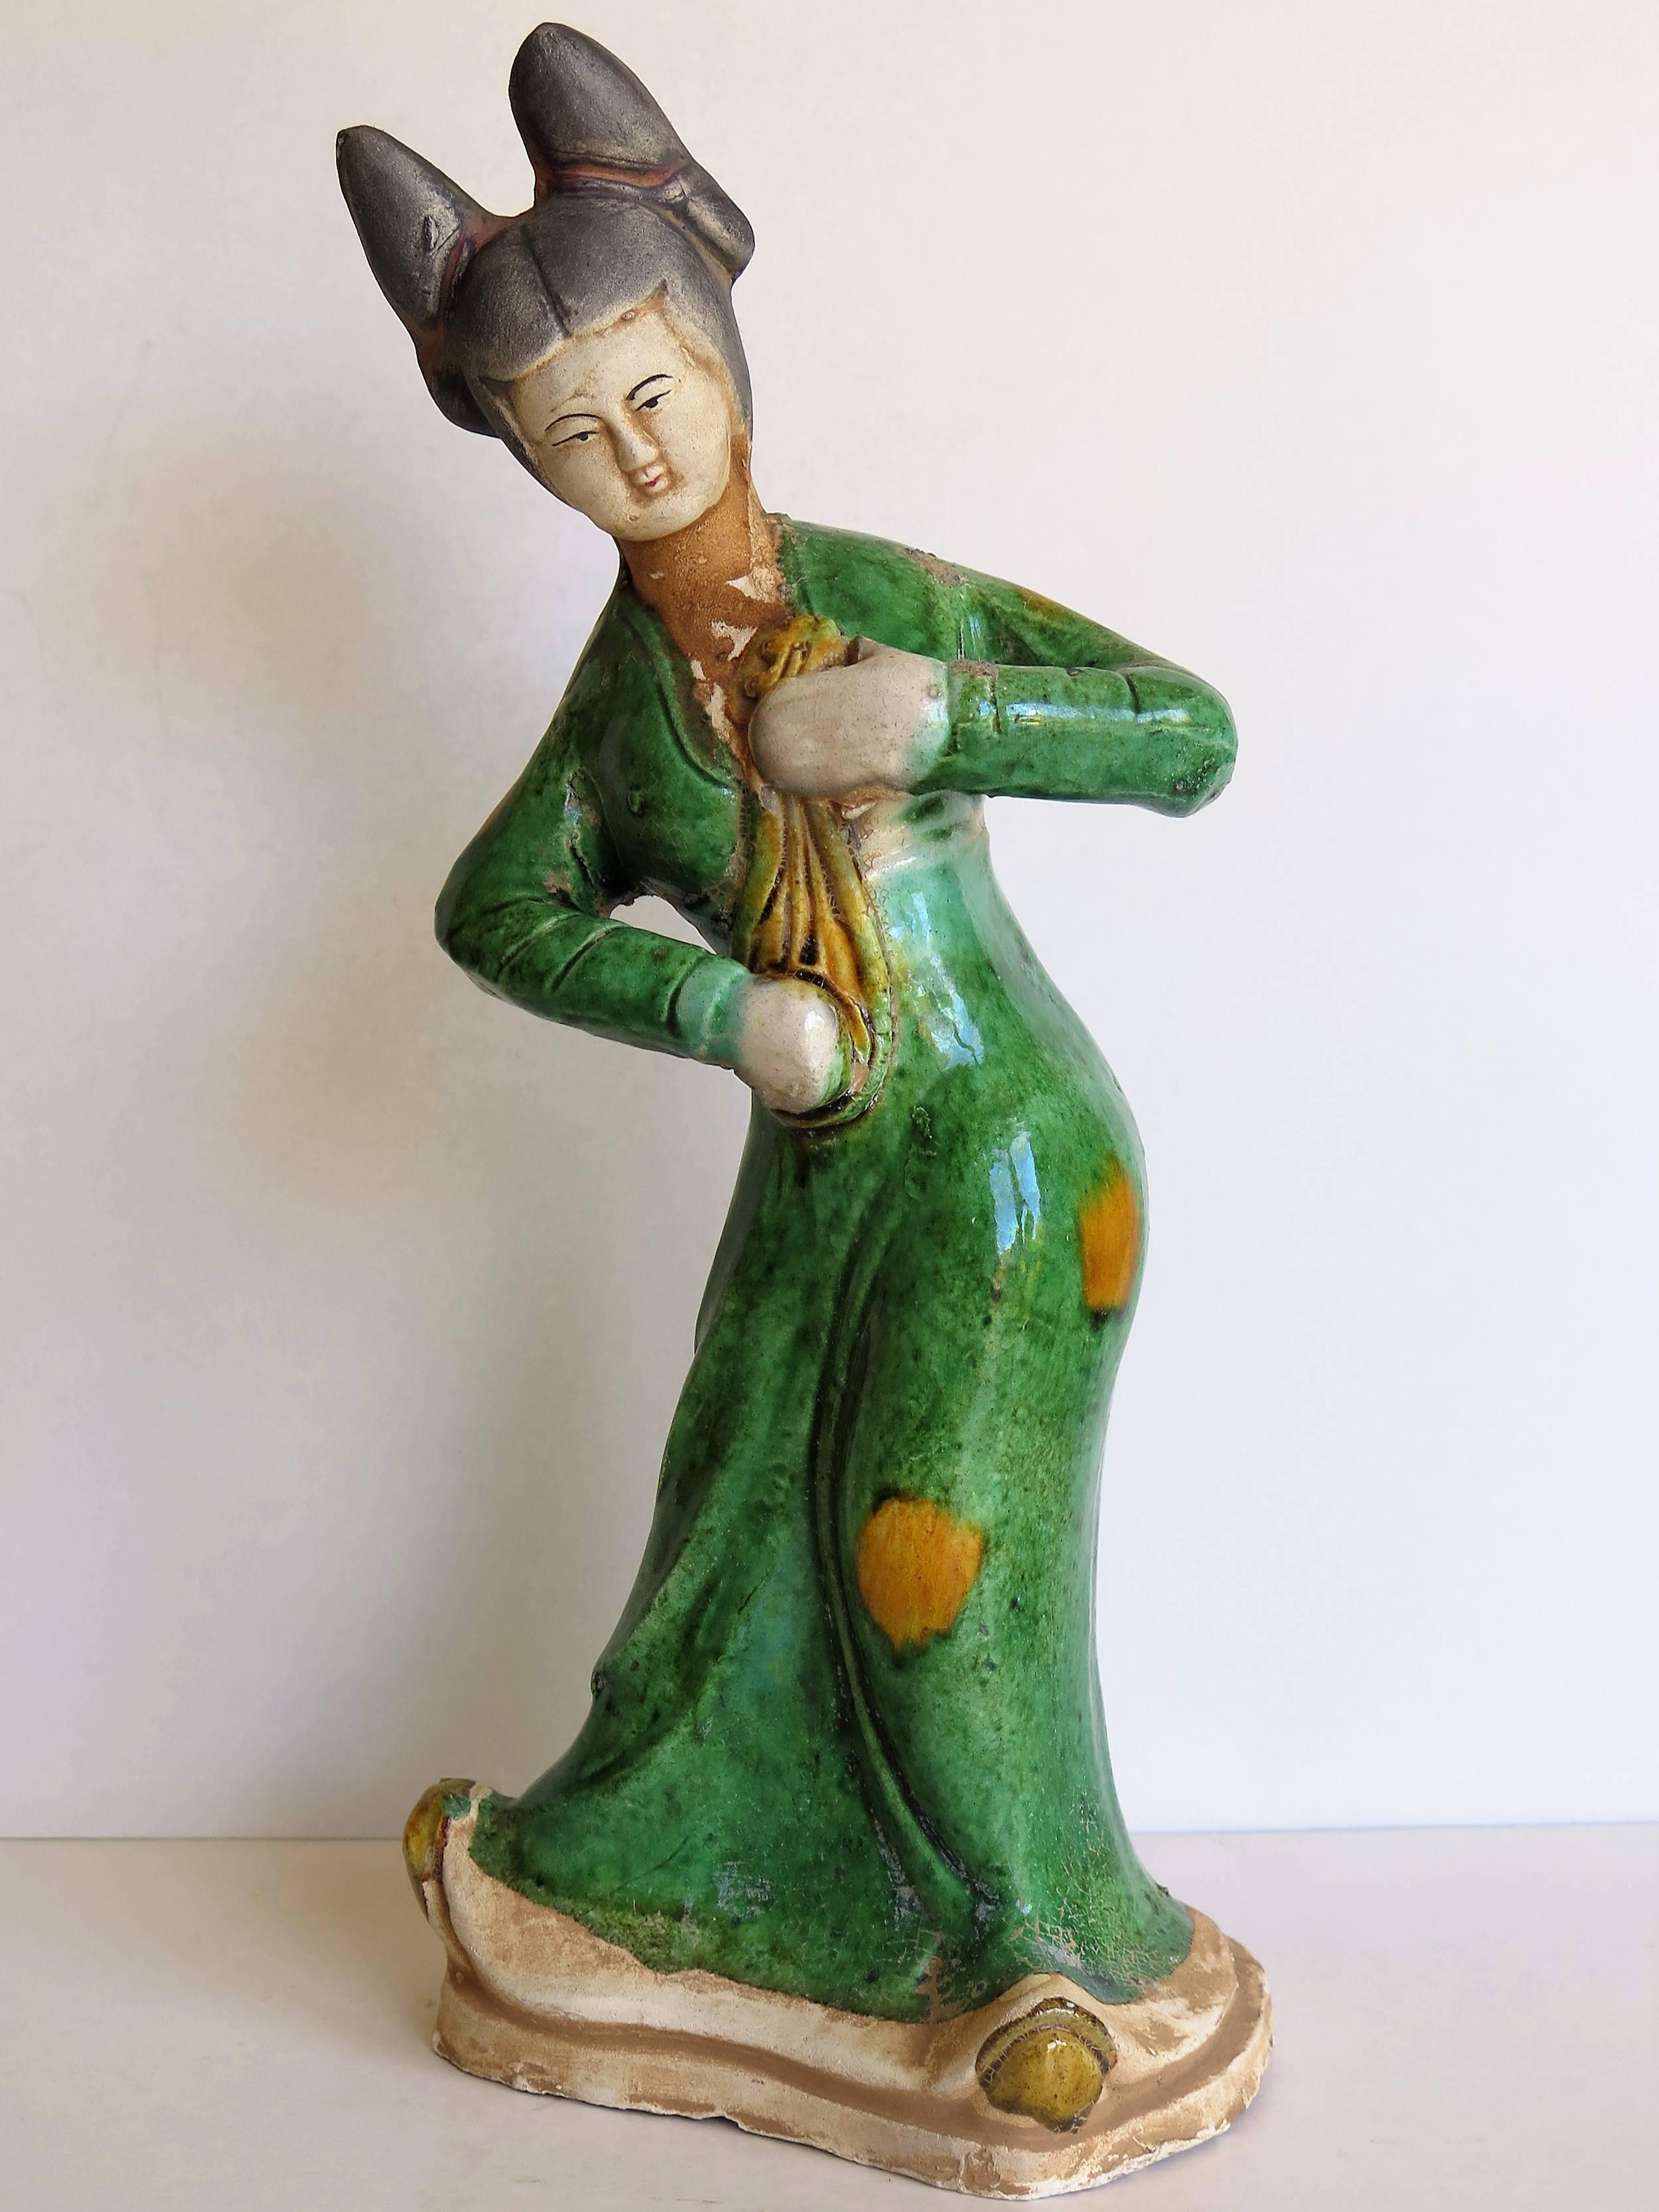 This is a good female Chinese figure or figurine playing a lute, hand sculpted out of terracotta (clay) and hand painted with some glazed polychrome enamels, made in China in the early 19th century Qing dynasty, or earlier, but in the Ming